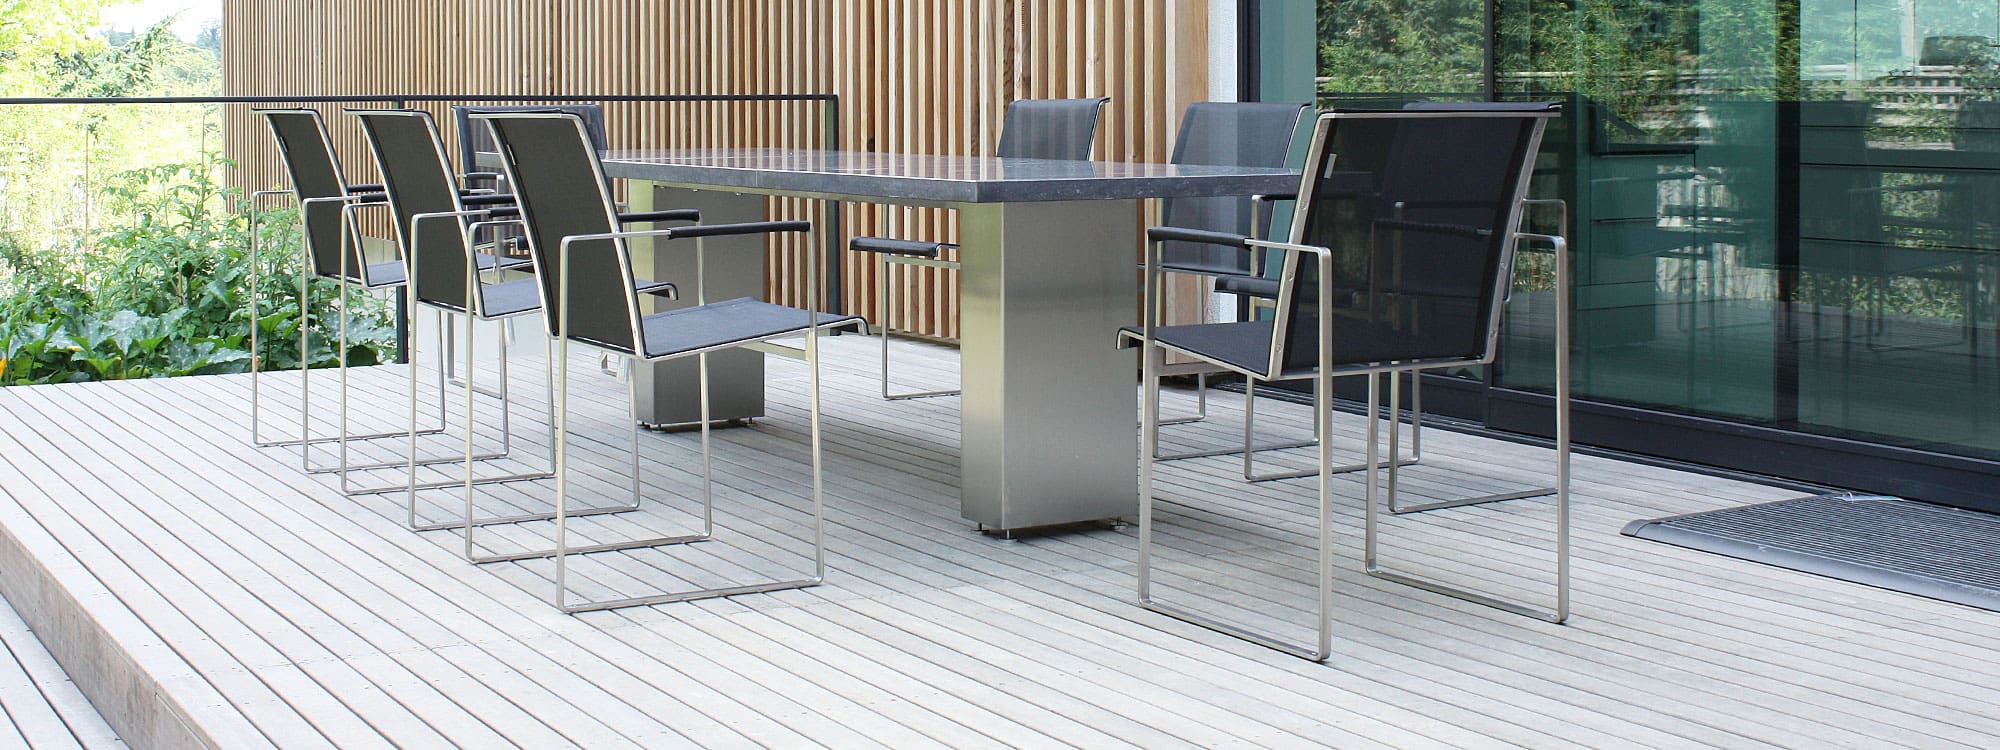 Image of installation of FueraDentro Doble minimalist garden dining table and Sillon outdoor chairs